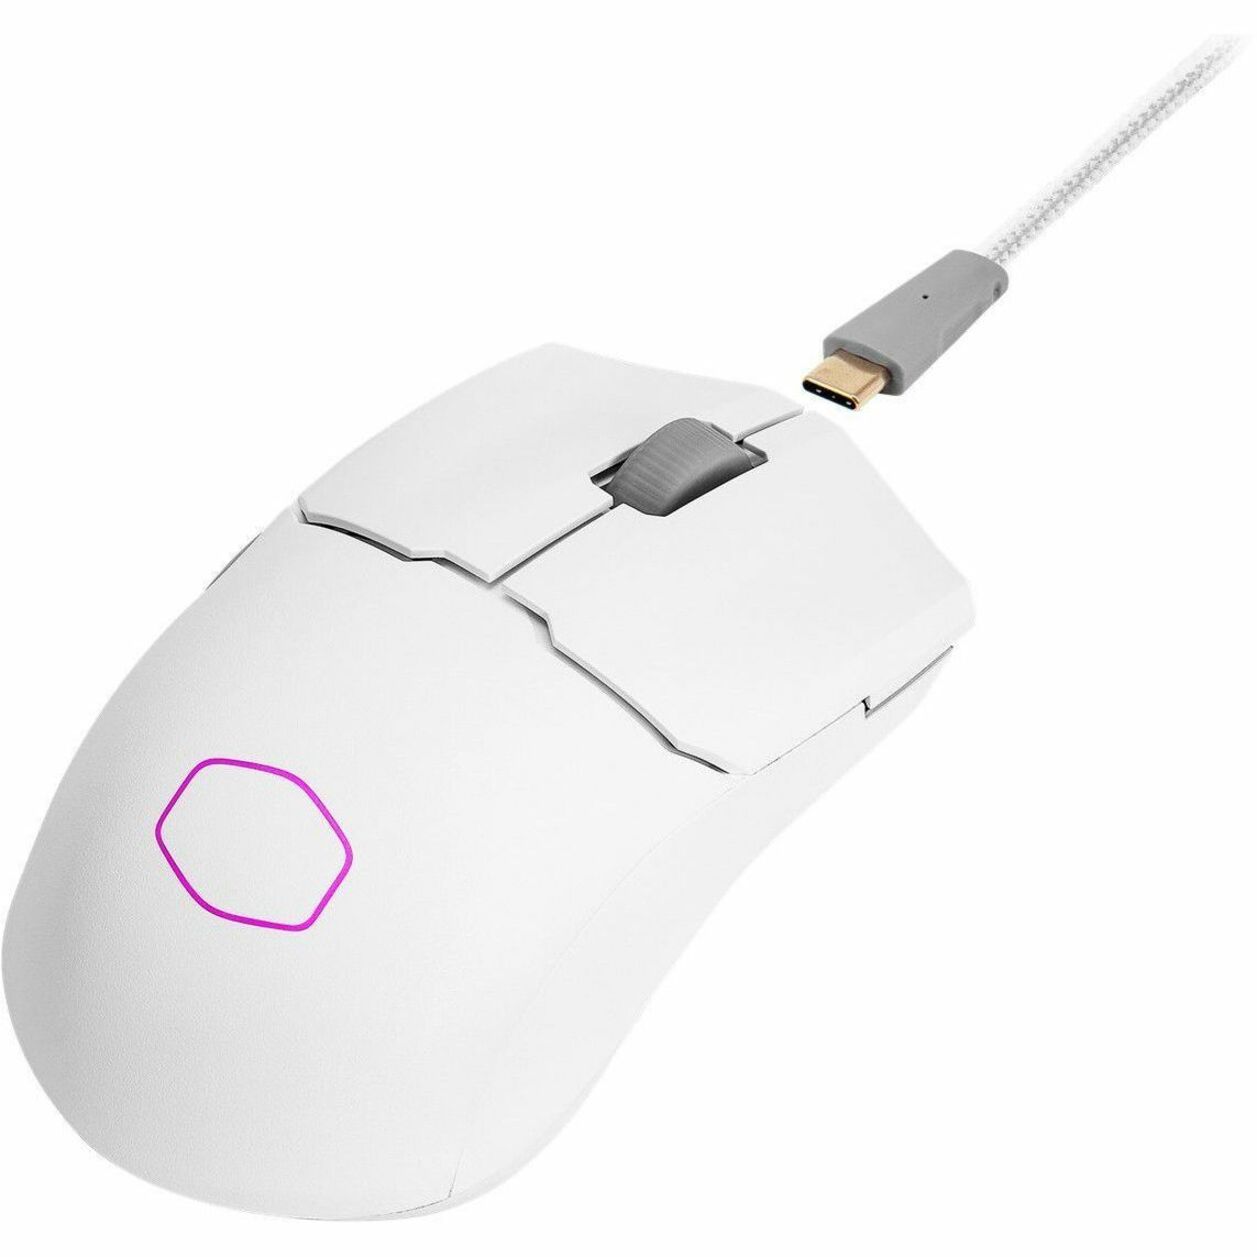 Cooler Master MM-712-WWOH1 MM712 Gaming Mouse, Rechargeable, 19000 dpi, Bluetooth 5.1, White